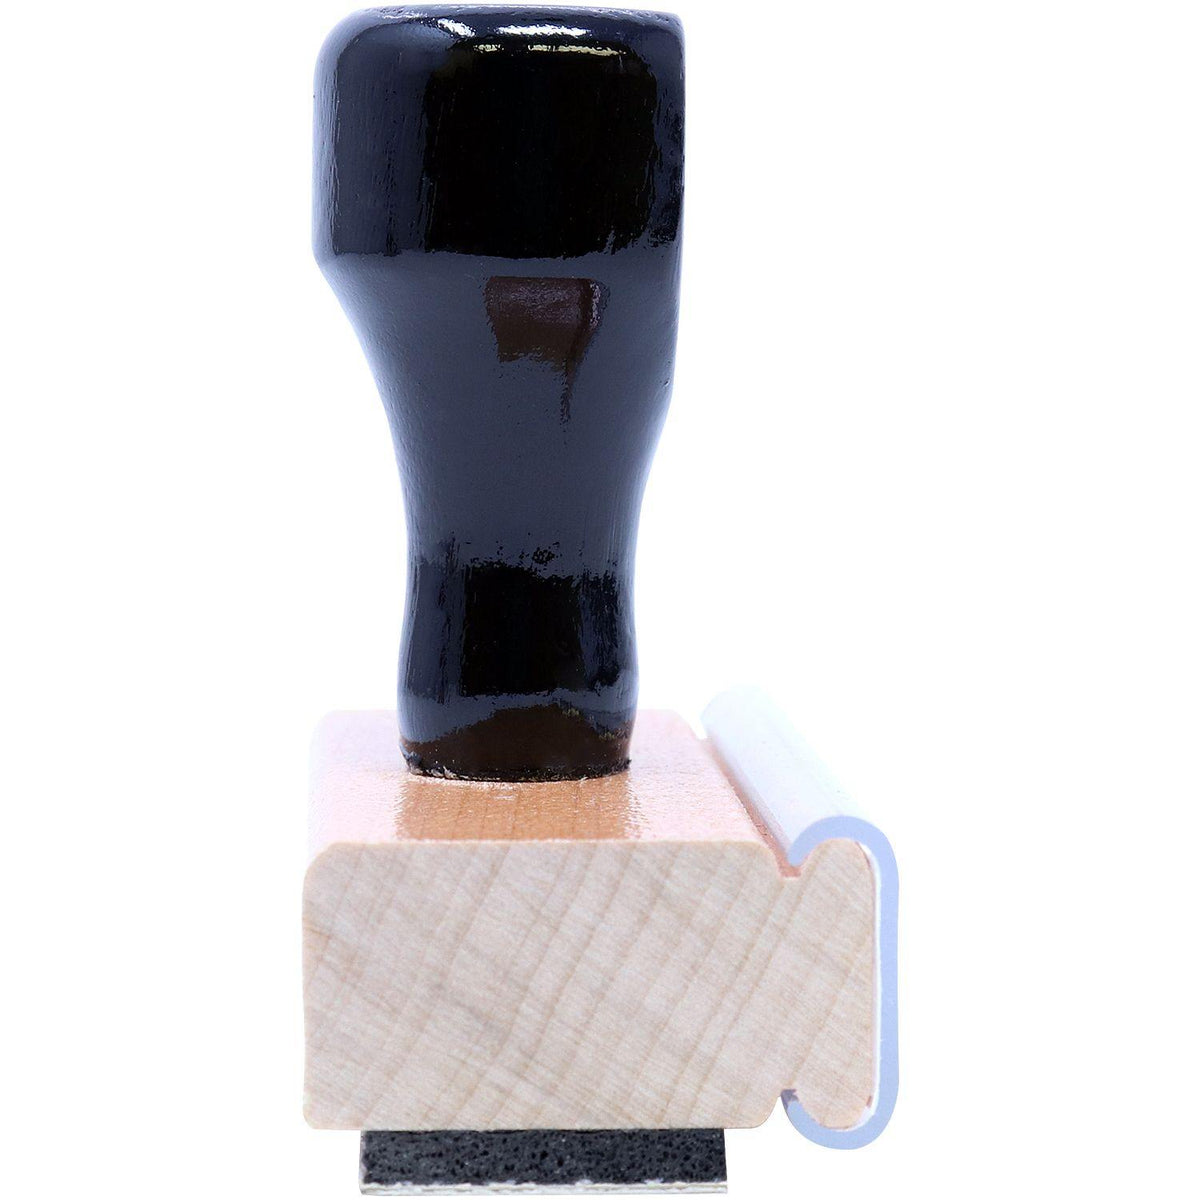 Large Void Rubber Stamp - Engineer Seal Stamps - Brand_Acorn, Impression Size_Large, Stamp Type_Regular Stamp, Type of Use_Office